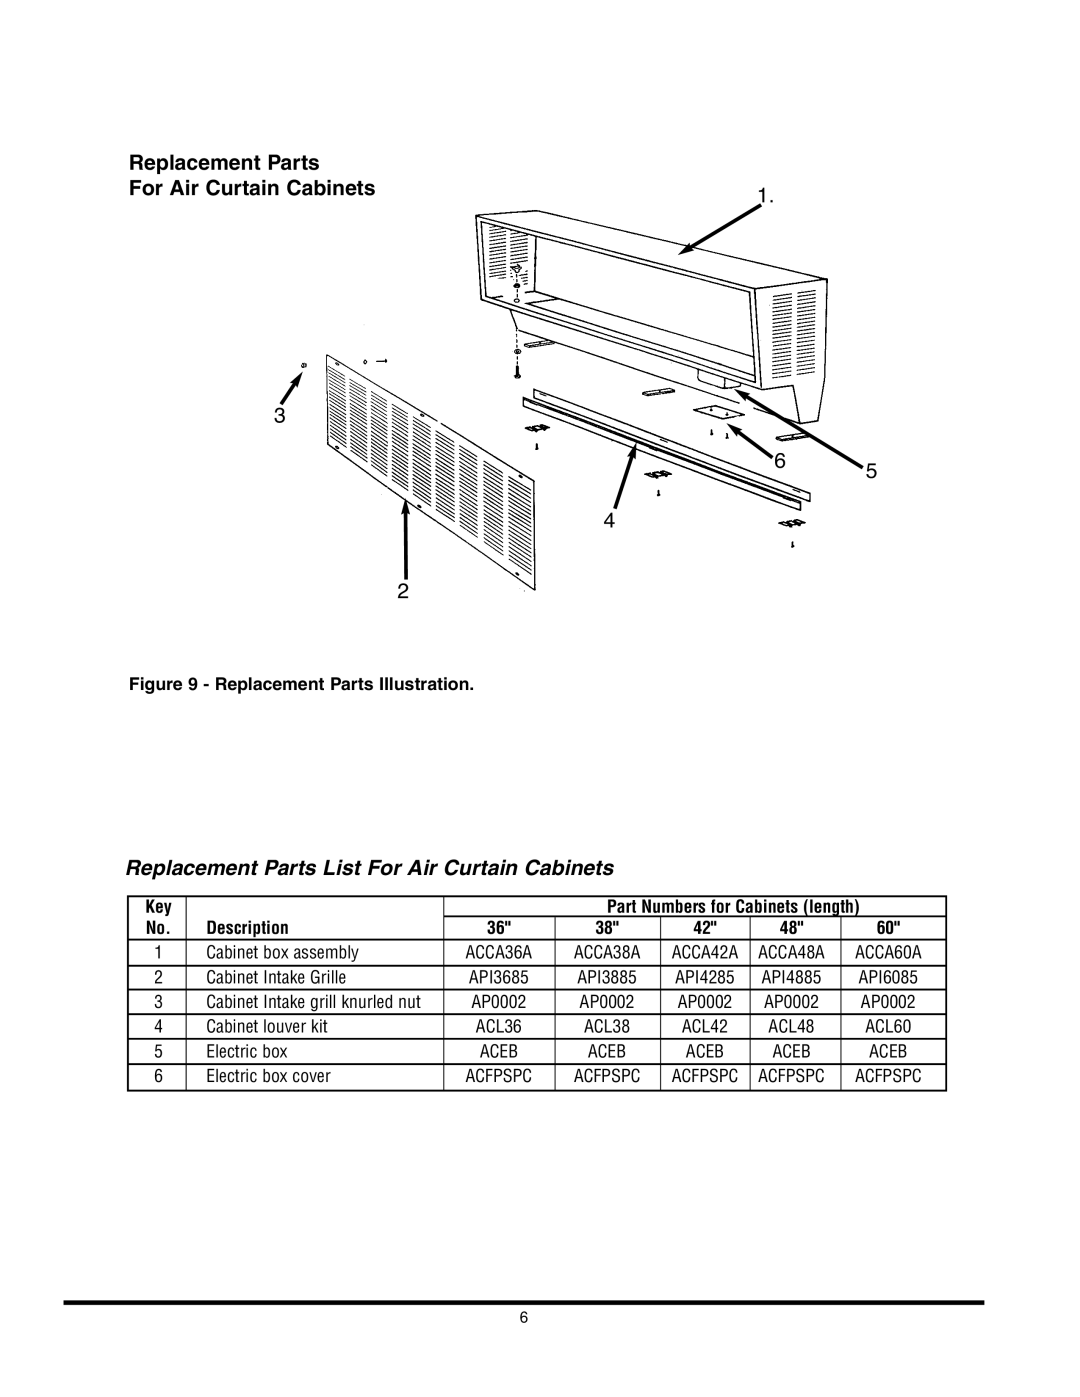 Marley Engineered Products Environmental Series, 5200-2409-001 specifications Replacement Parts, For Air Curtain Cabinets 